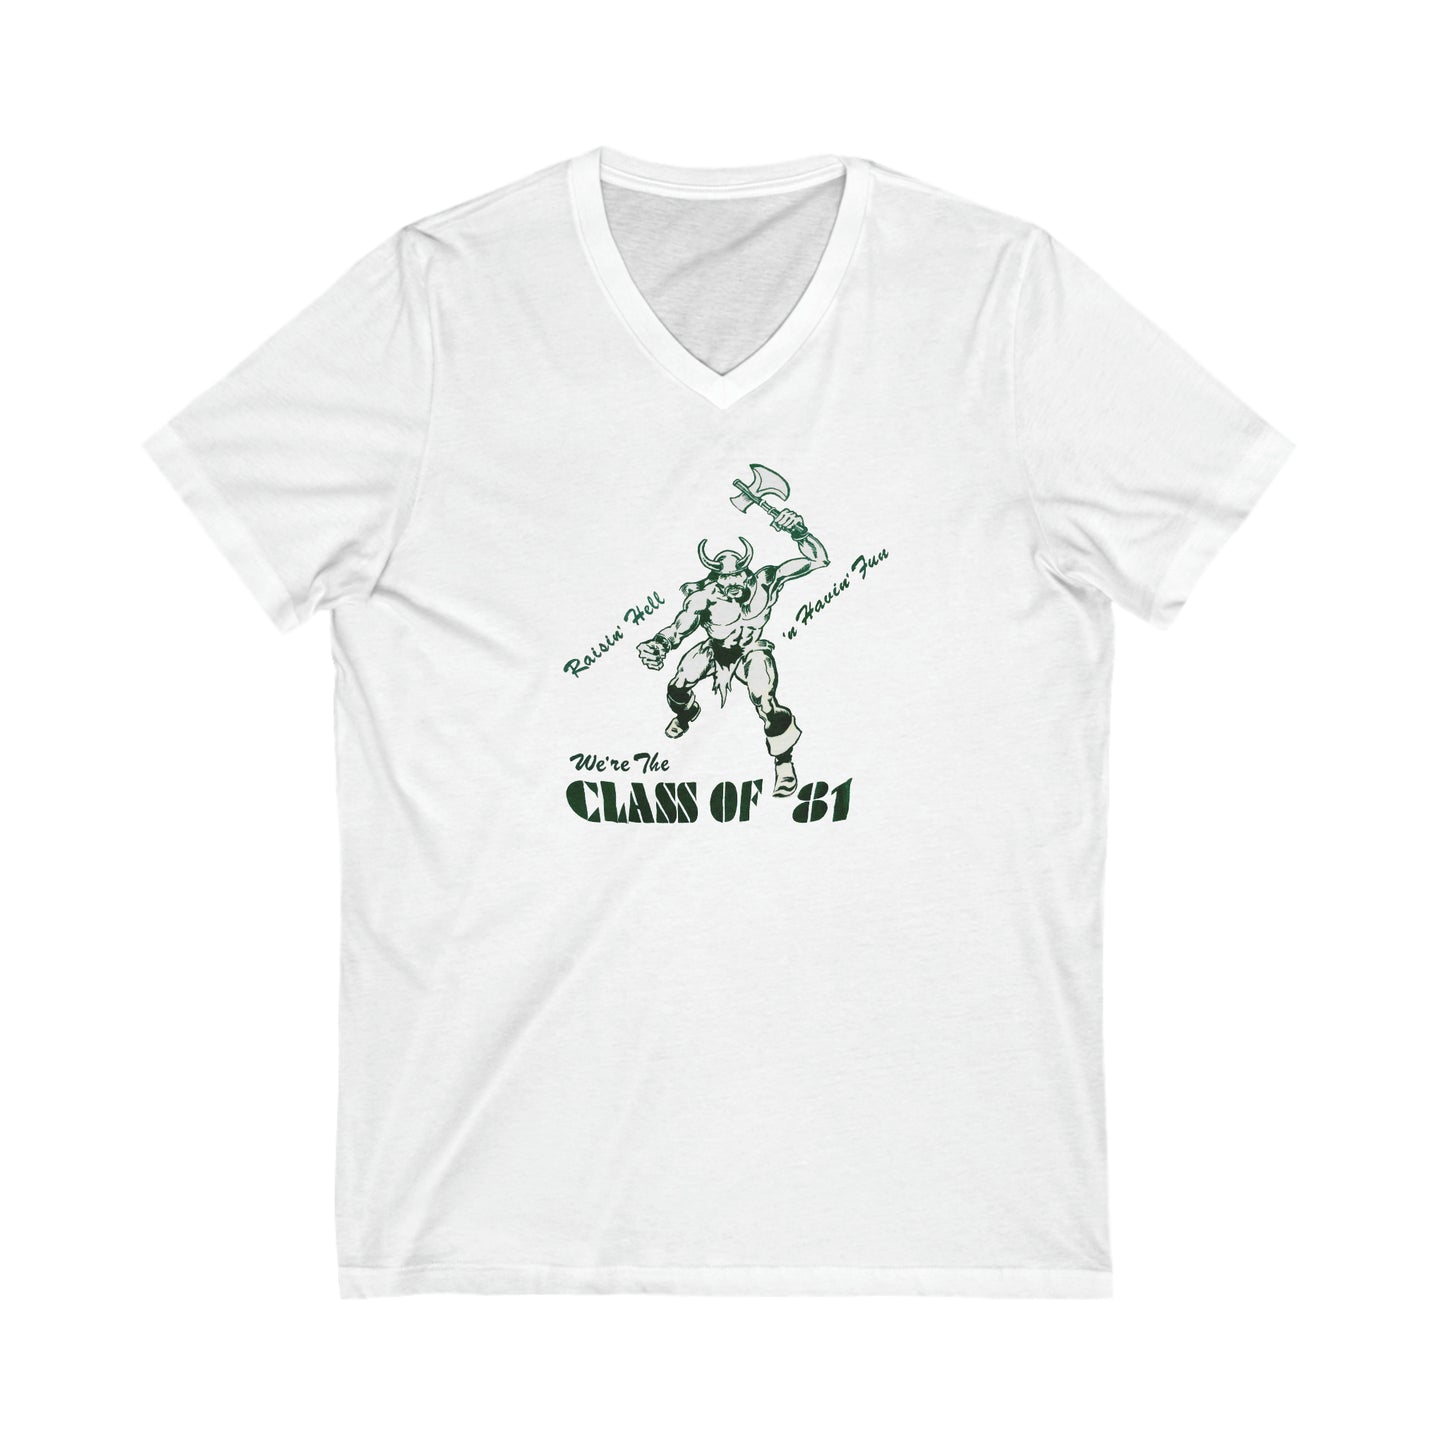 Paly 81 V-Neck T-Shirt - Palo Alto High School - Exclusive 1981